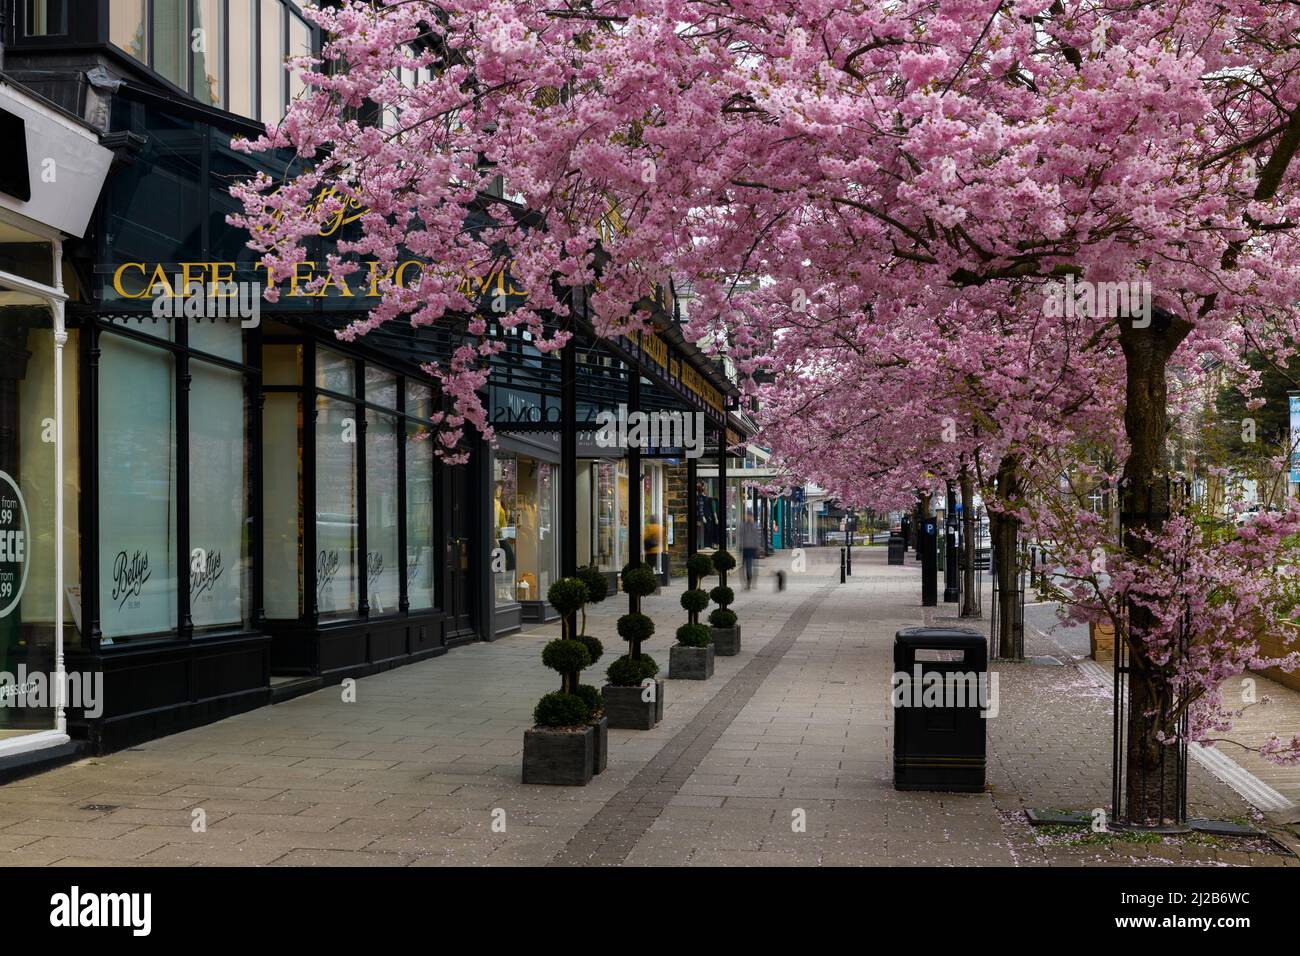 Scenic spring town centre (beautiful colourful cherry trees in bloom, stylish restaurant-cafe shopfront) - The Grove, Ilkley, Yorkshire, England, UK. Stock Photo